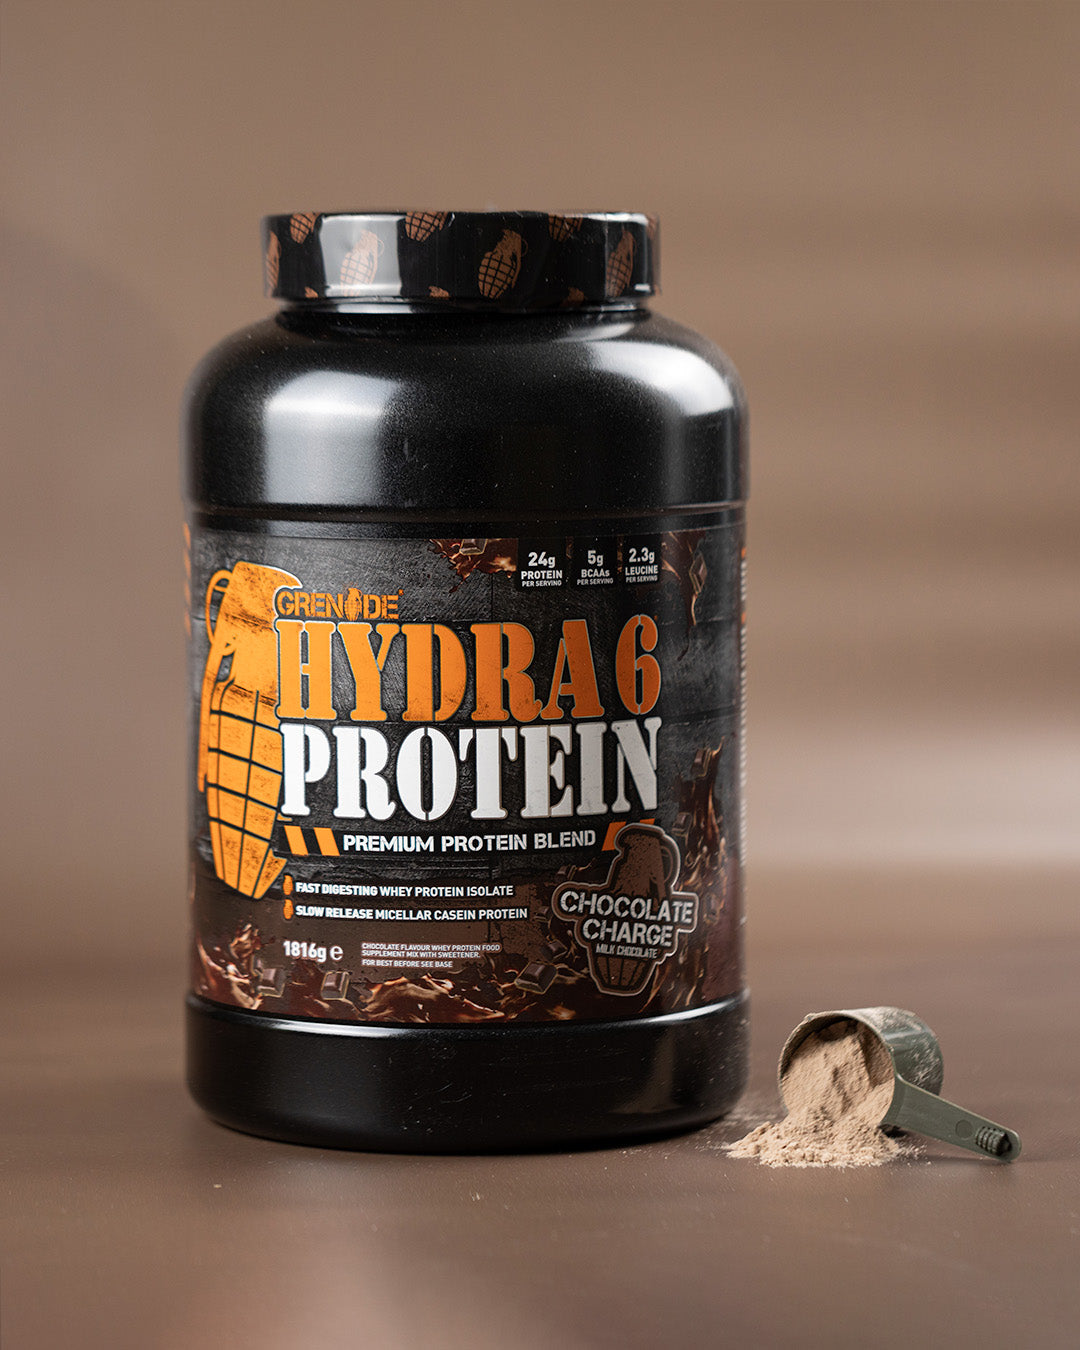 Grenade Hydra 6 Protein Powder - Chocolate Charge with Scoop